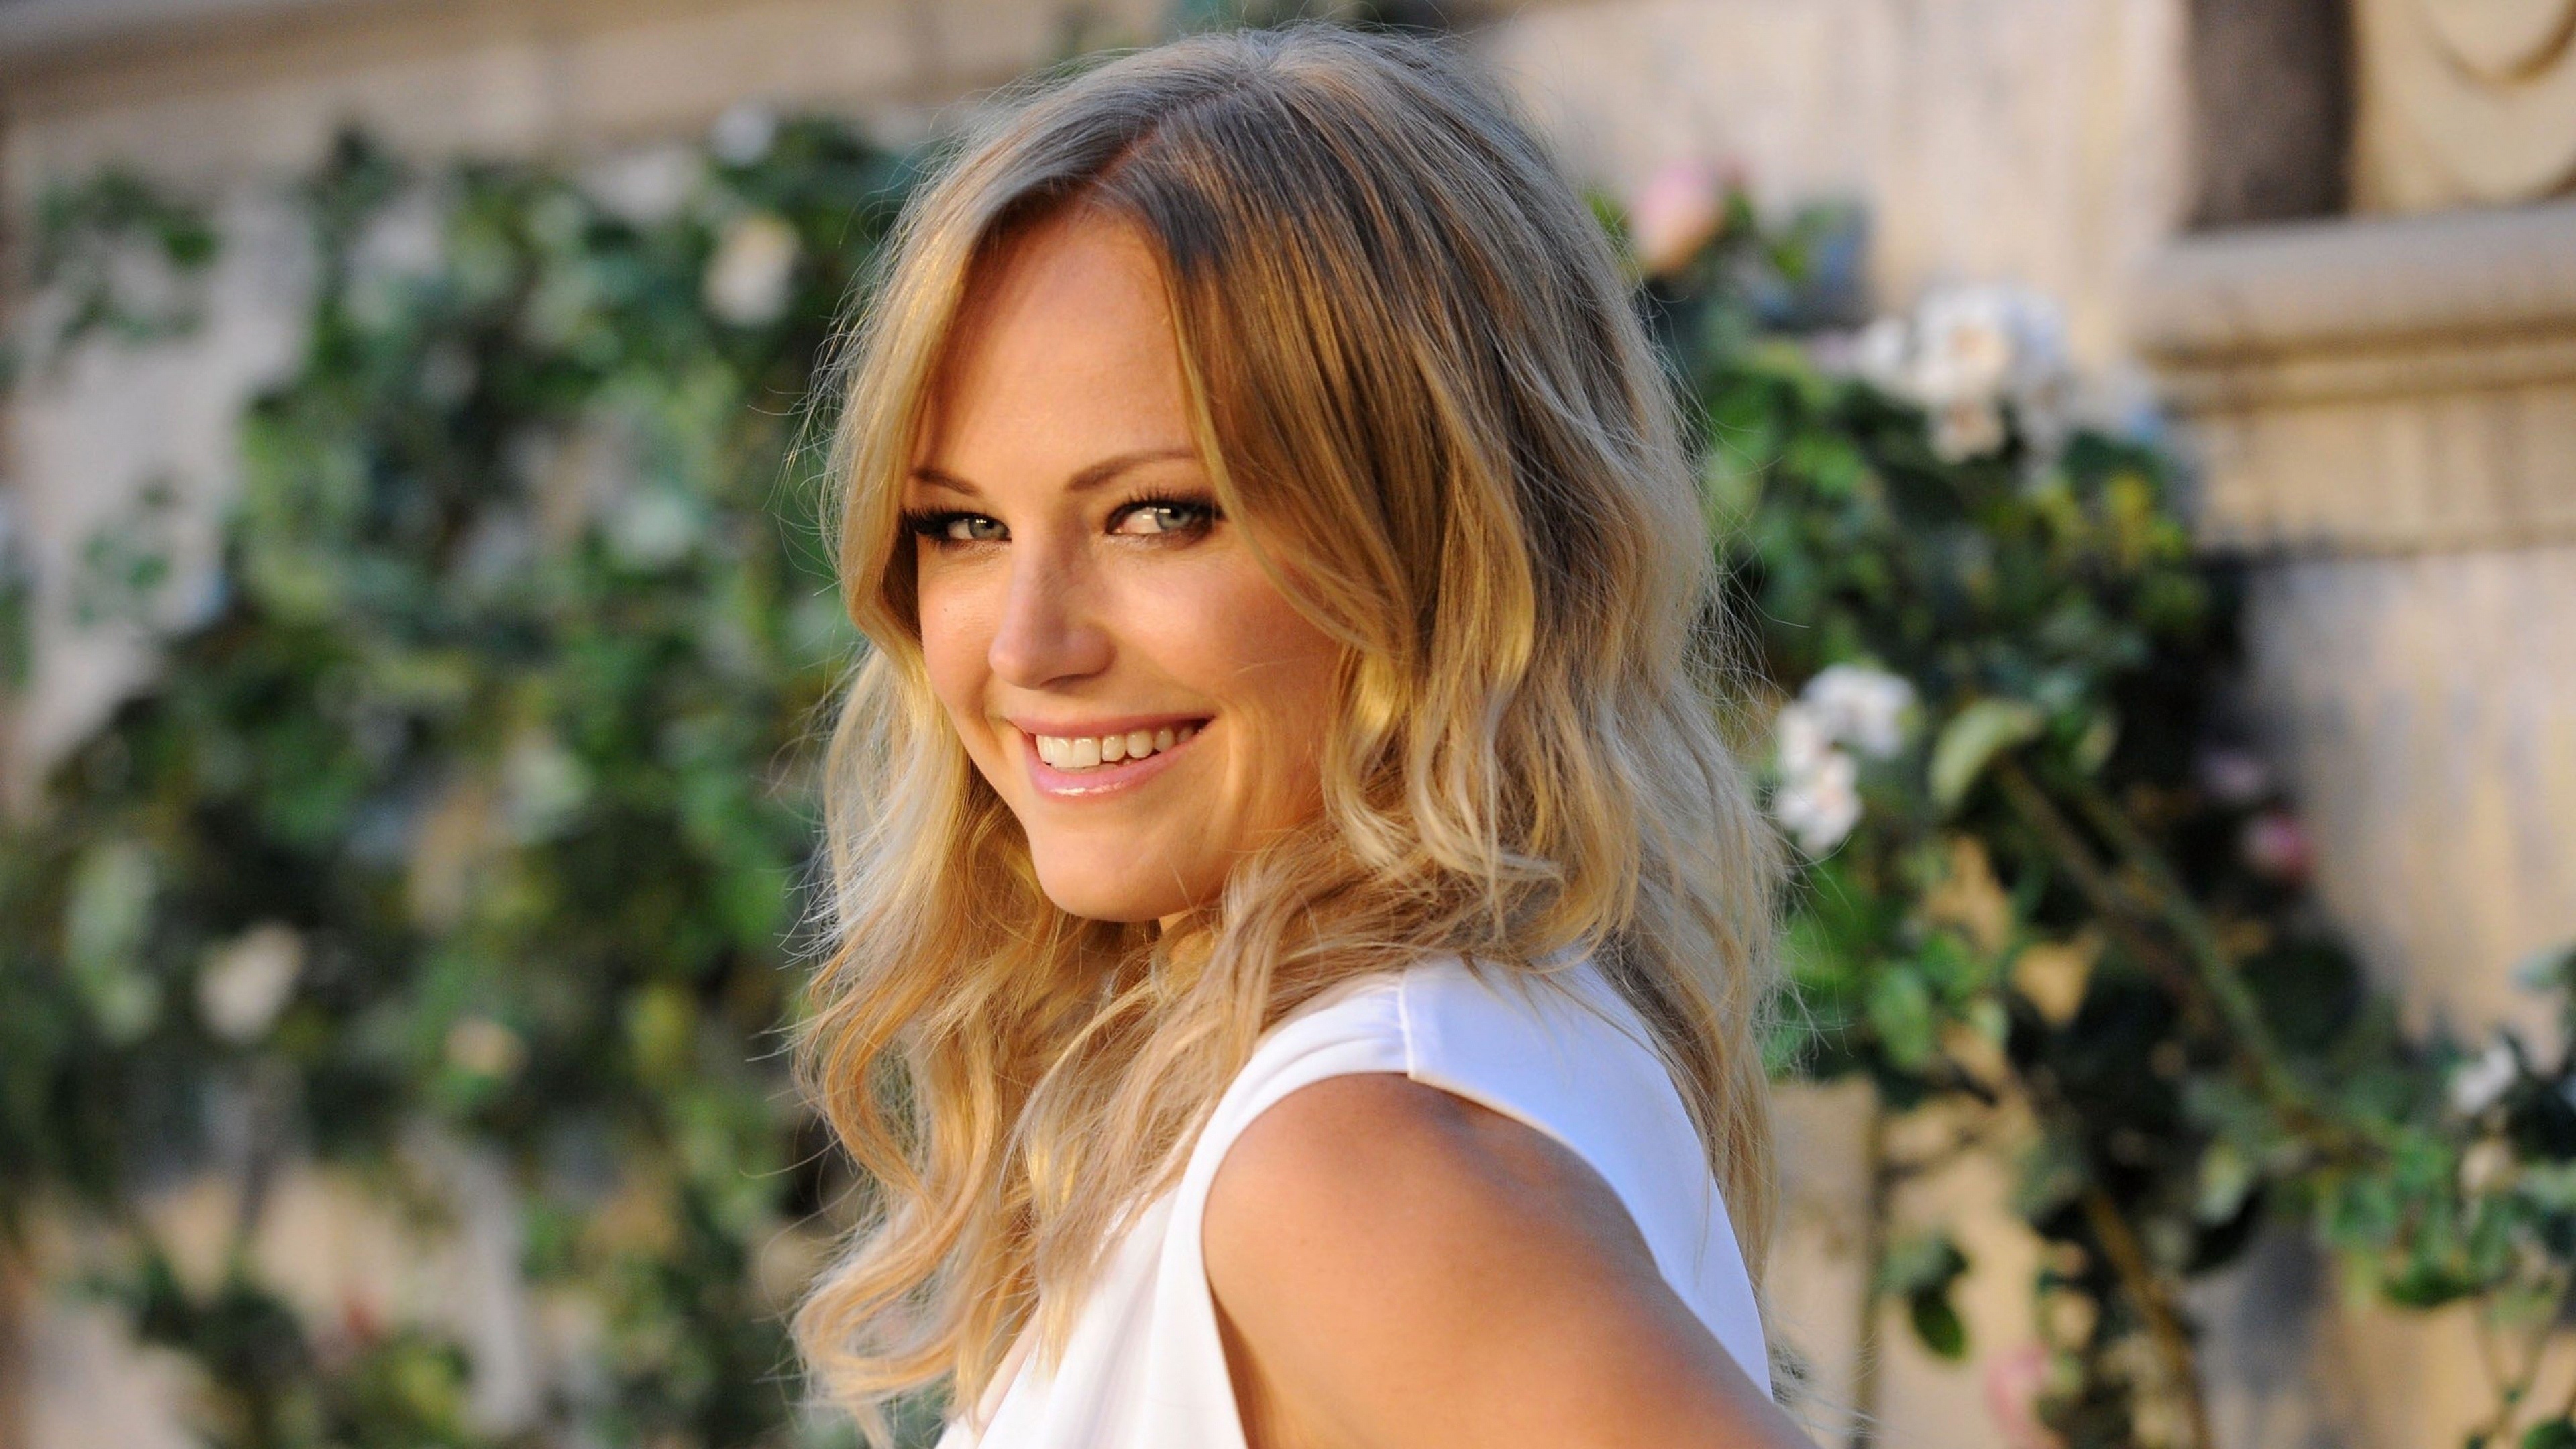 Malin Akerman: A Swedish-American raised in Canada, actress, producer, and model. 3840x2160 4K Background.